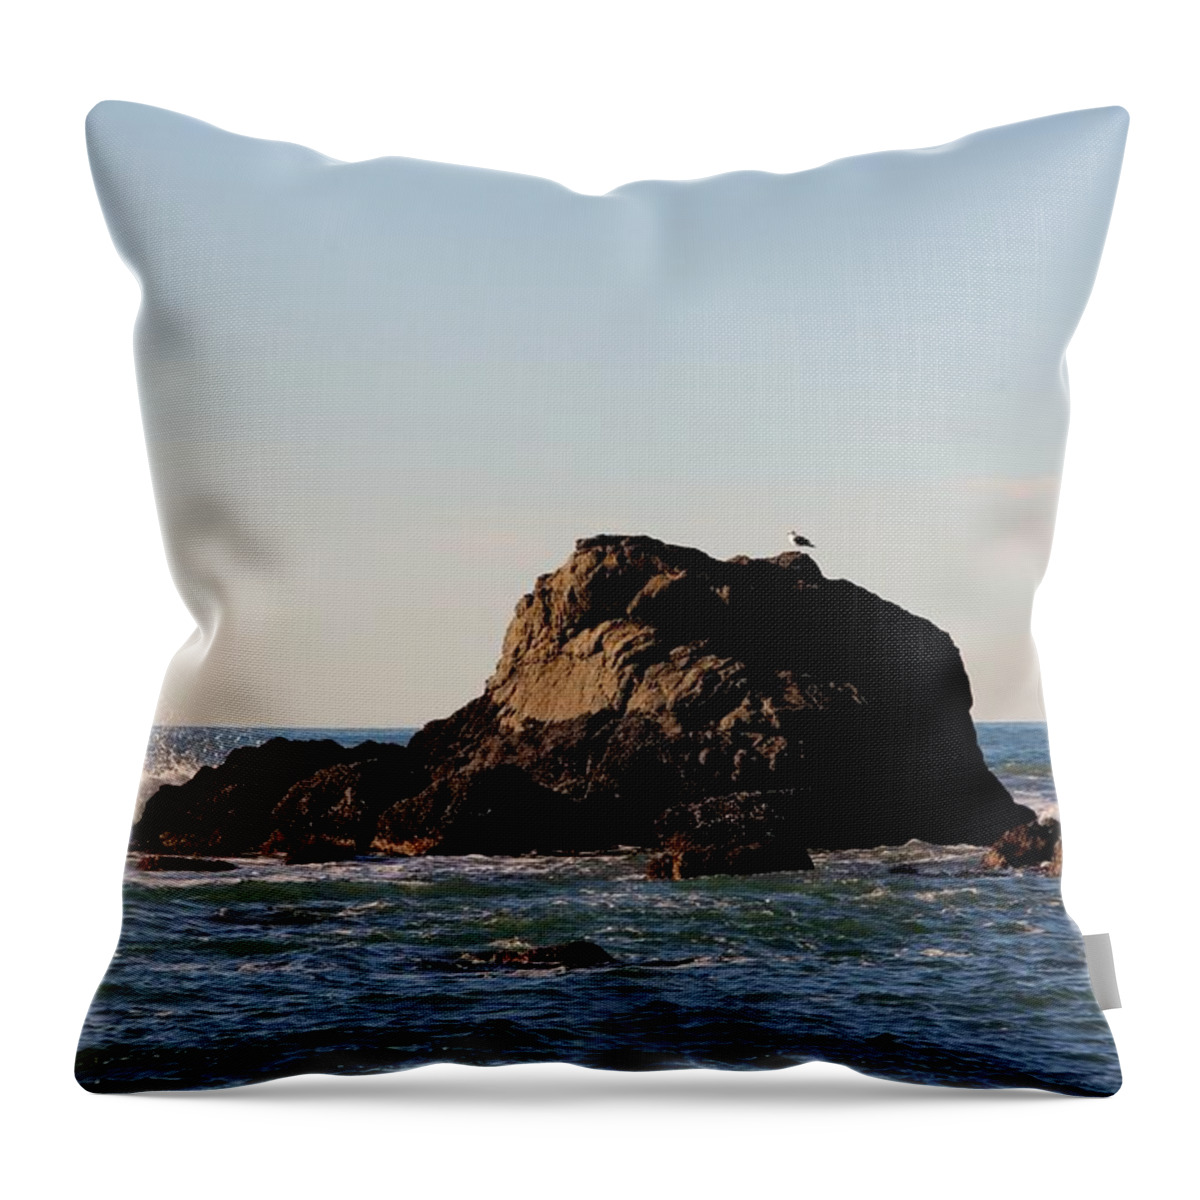 Landscape Throw Pillow featuring the photograph Lonely Bird by Lisa Thompson